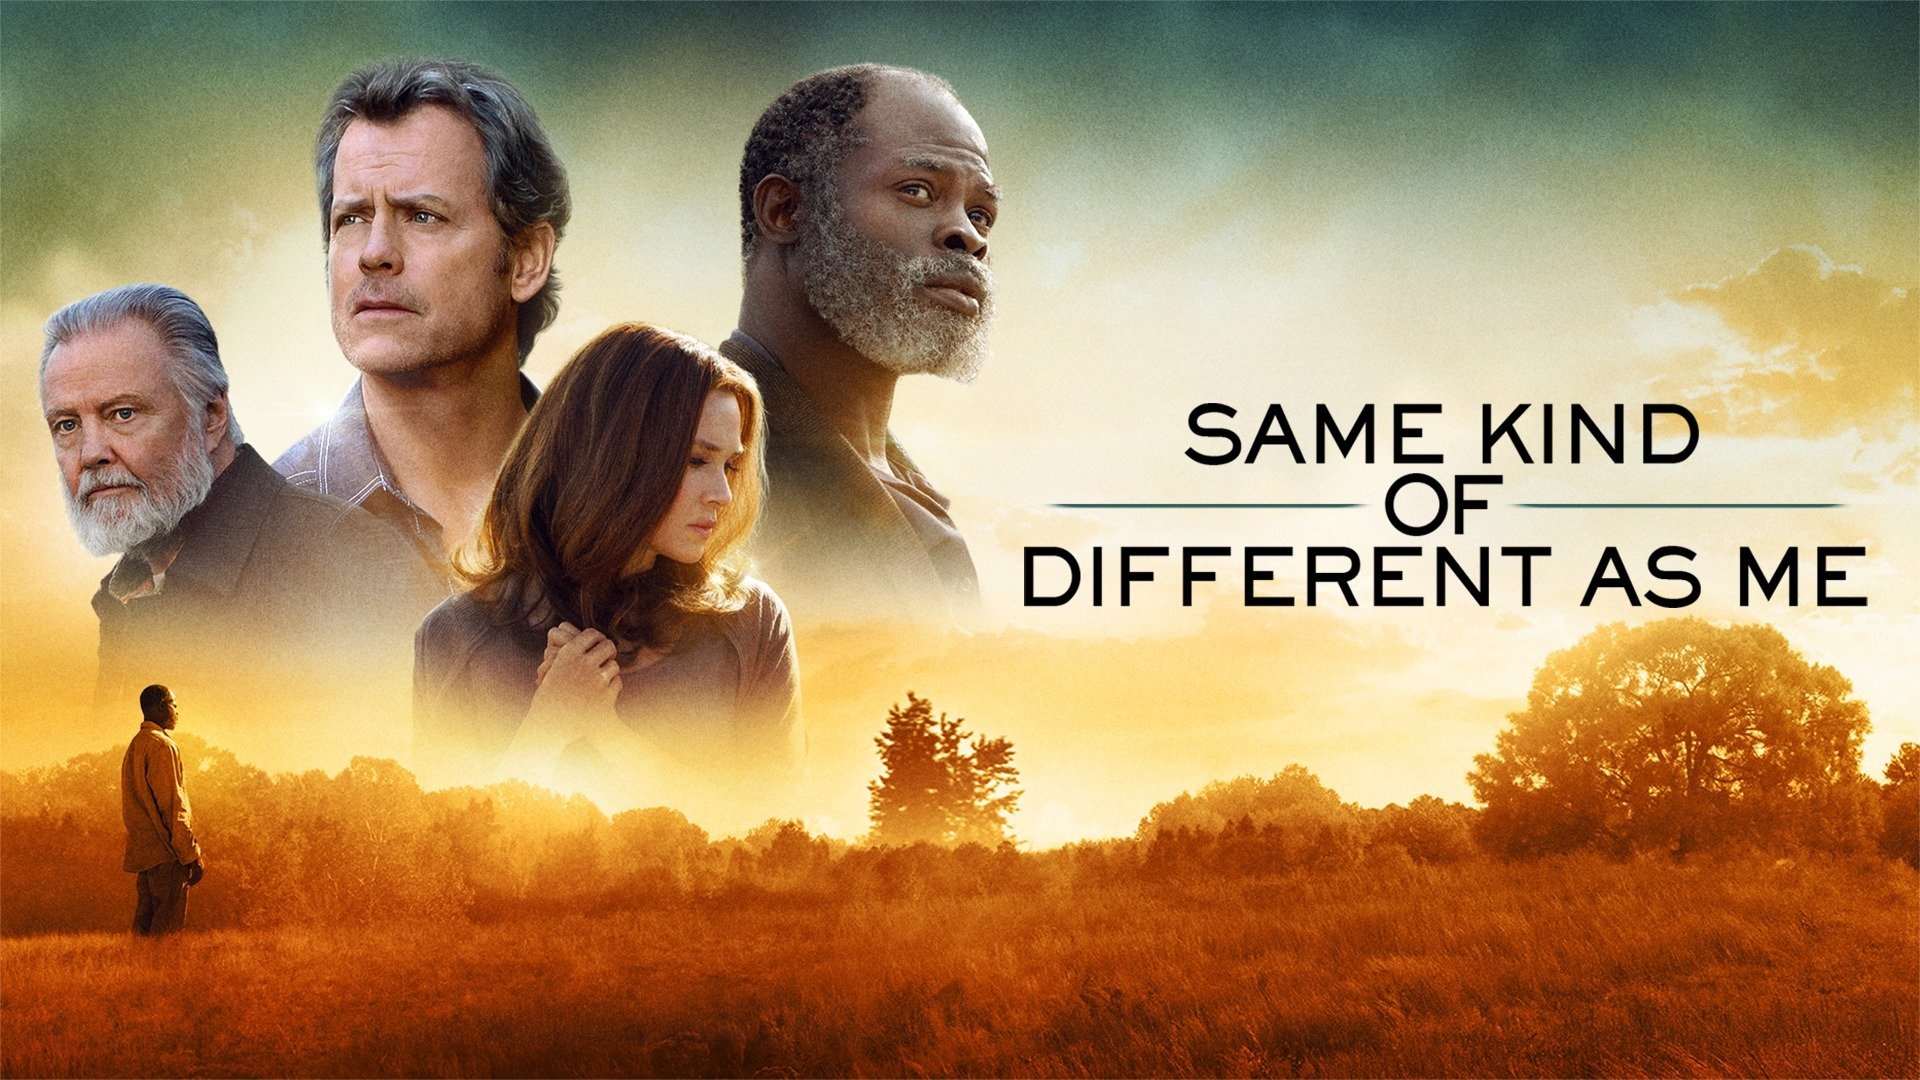 Same Kind of Different as Me, Full movie, Watch online, 1920x1080 Full HD Desktop